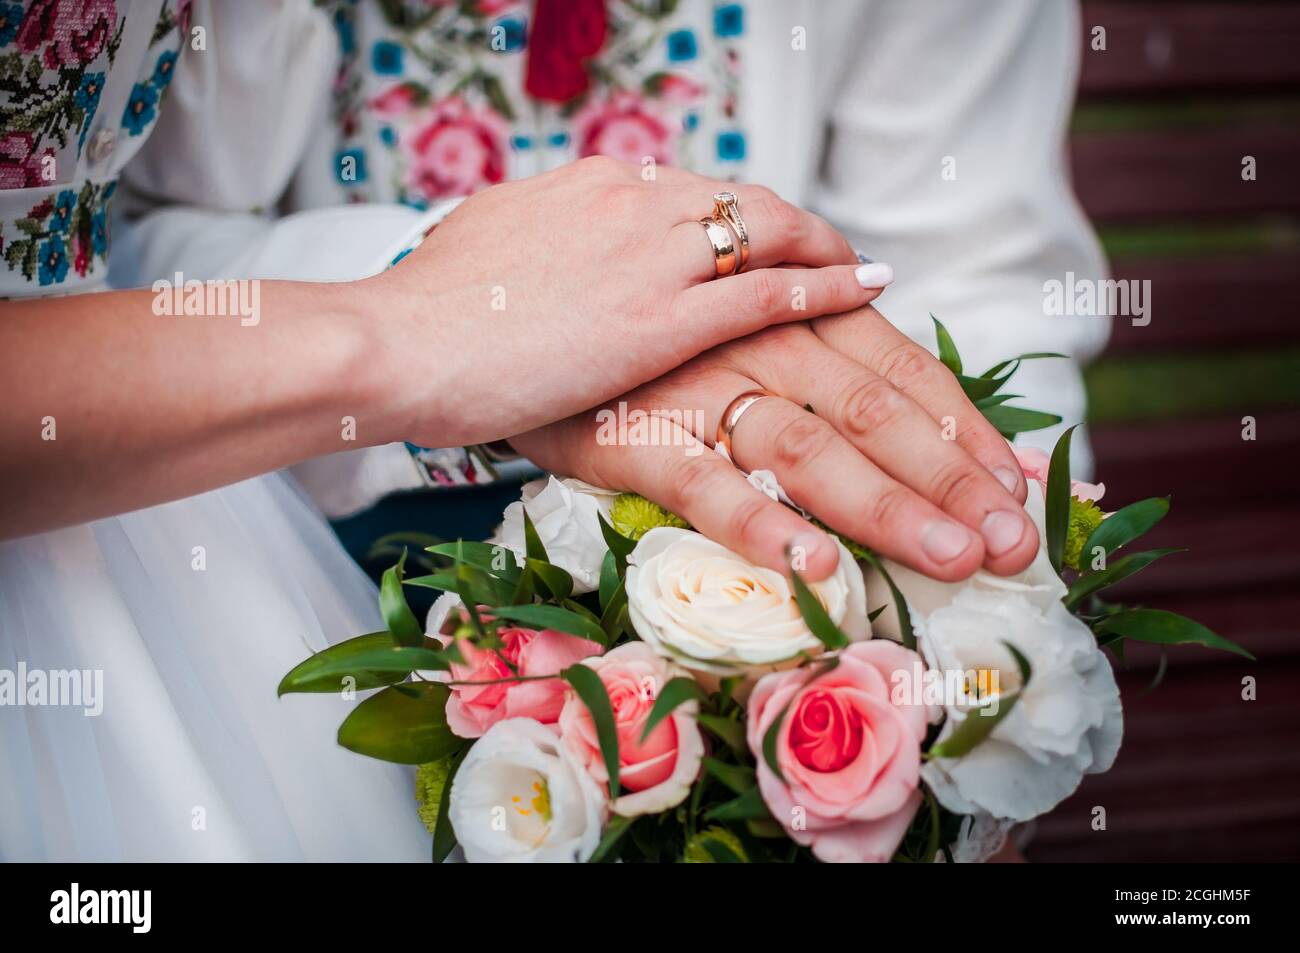 hands of newlyweds with wedding rings on a wedding bouquet with white and pink roses Stock Photo